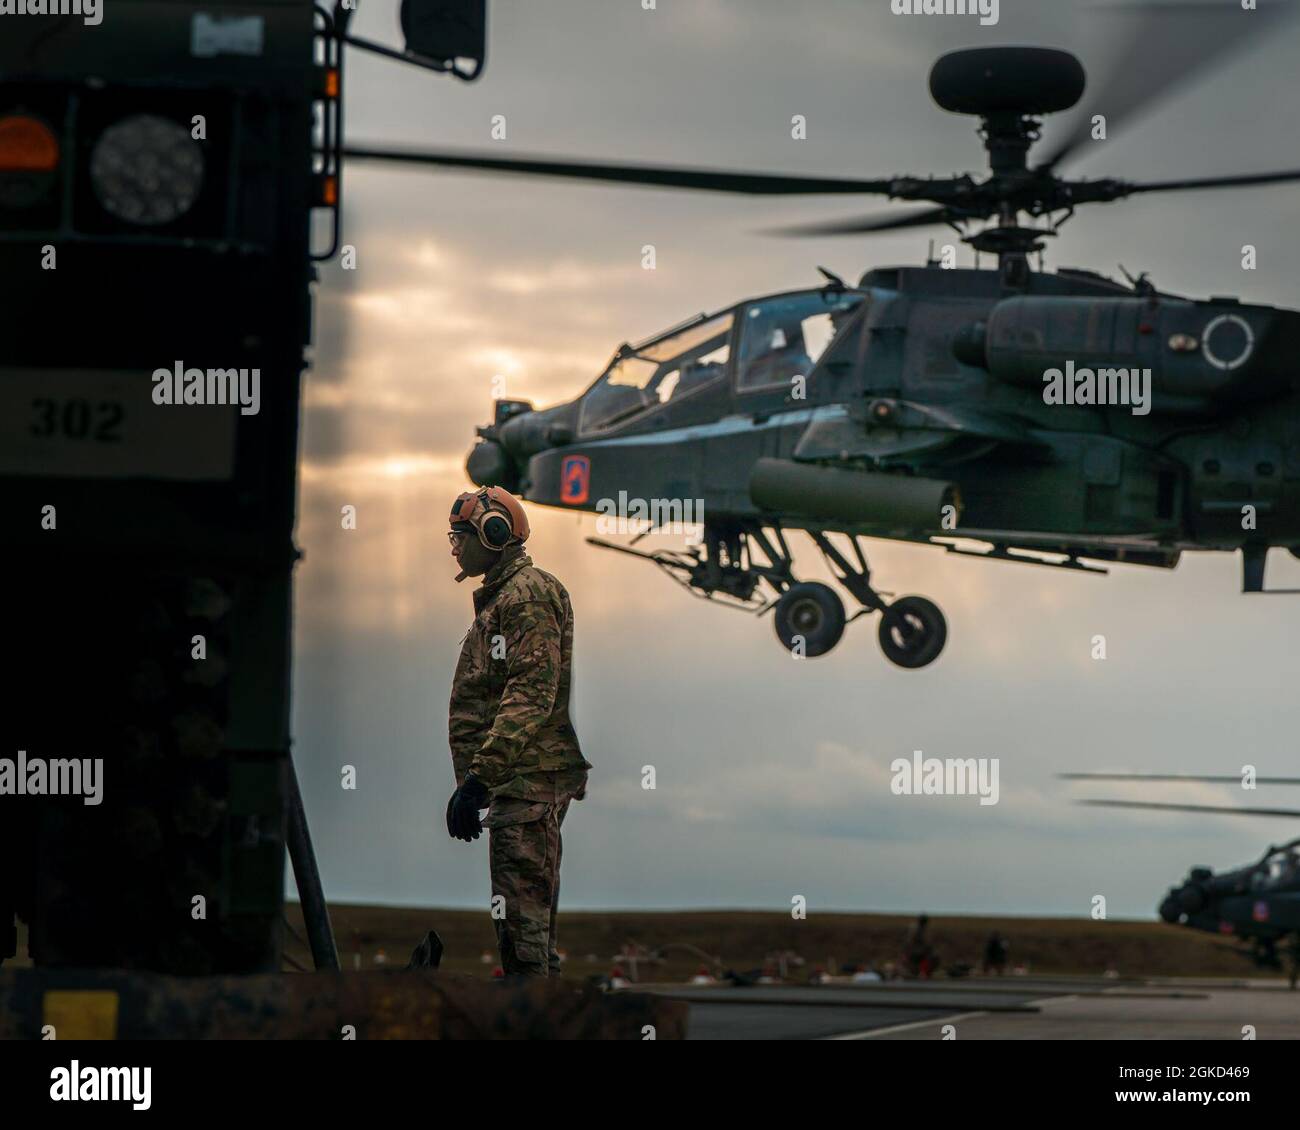 U.S. Army Spc. Brian Johnson, an ammunition specialist assigned to the 12th Combat Aviation Brigade, turns away from the rotor blast as a fully-fueled AH-64 launches from the forward area rearming and refueling point during Operation Eminent Strike on Mar. 17, 2021, at Katterbach Army Airfield. Stock Photo